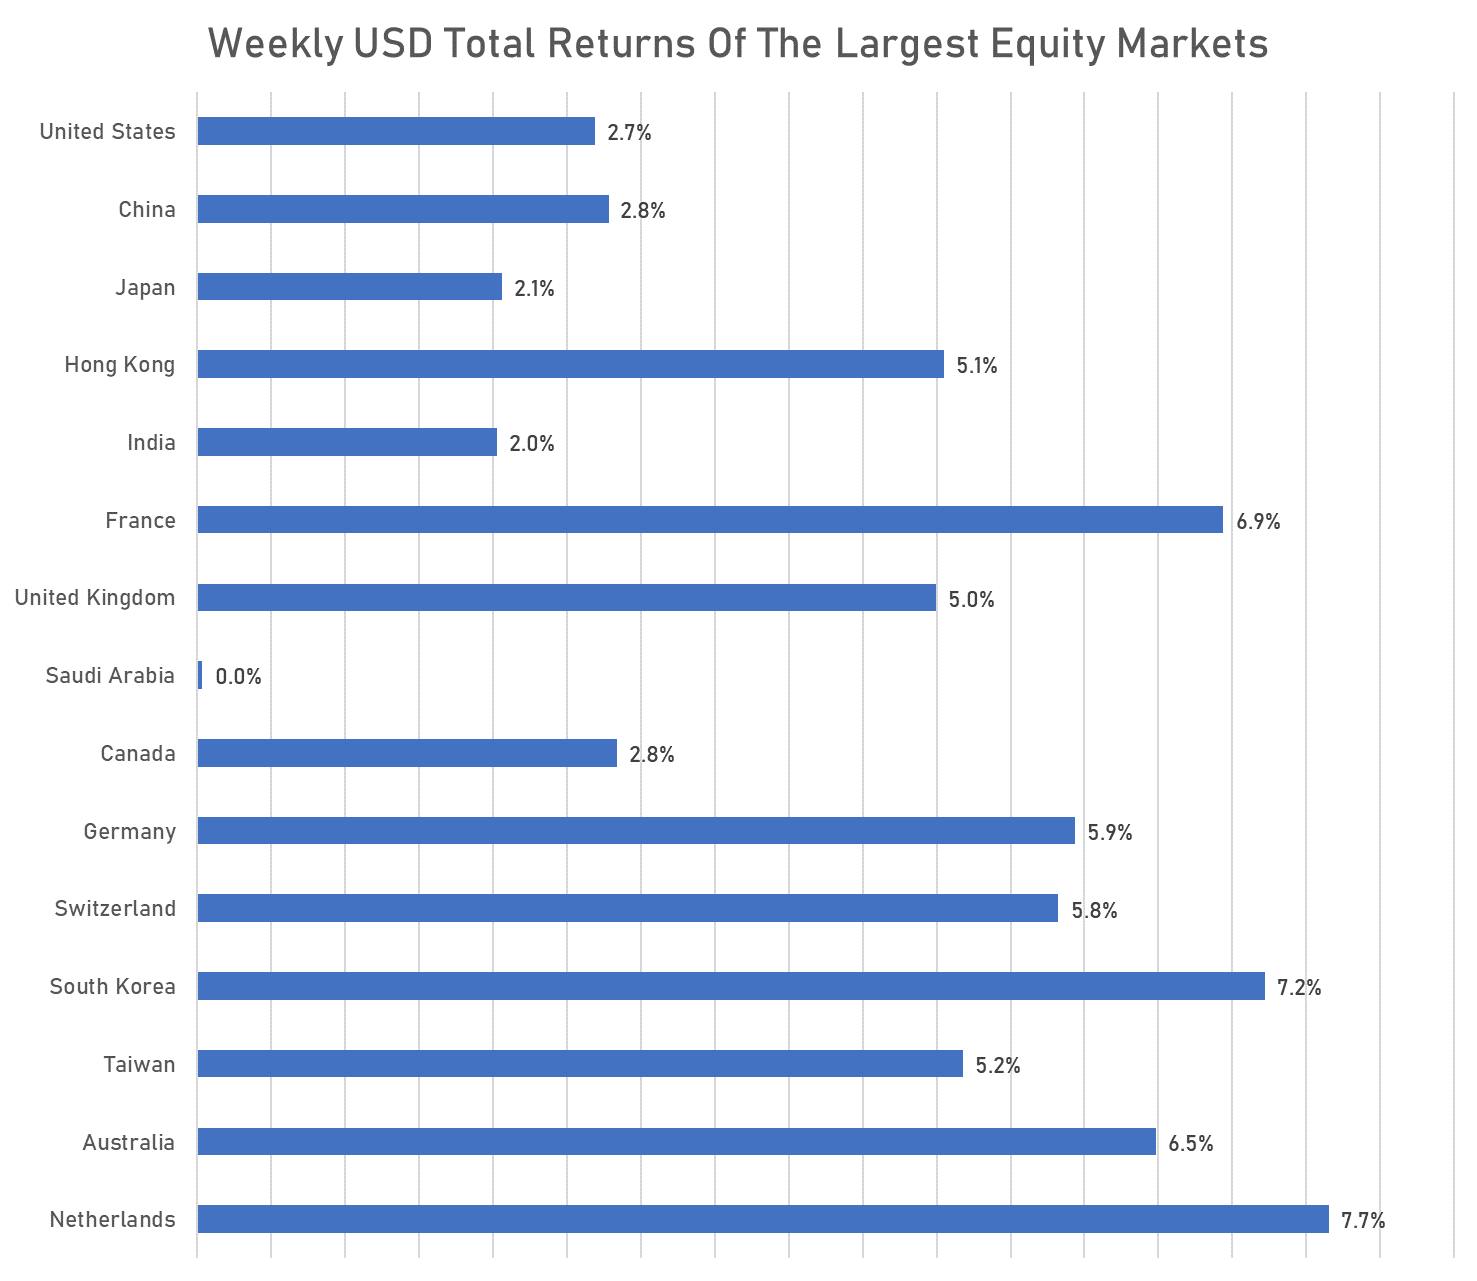 Weekly USD TR for major equity markets